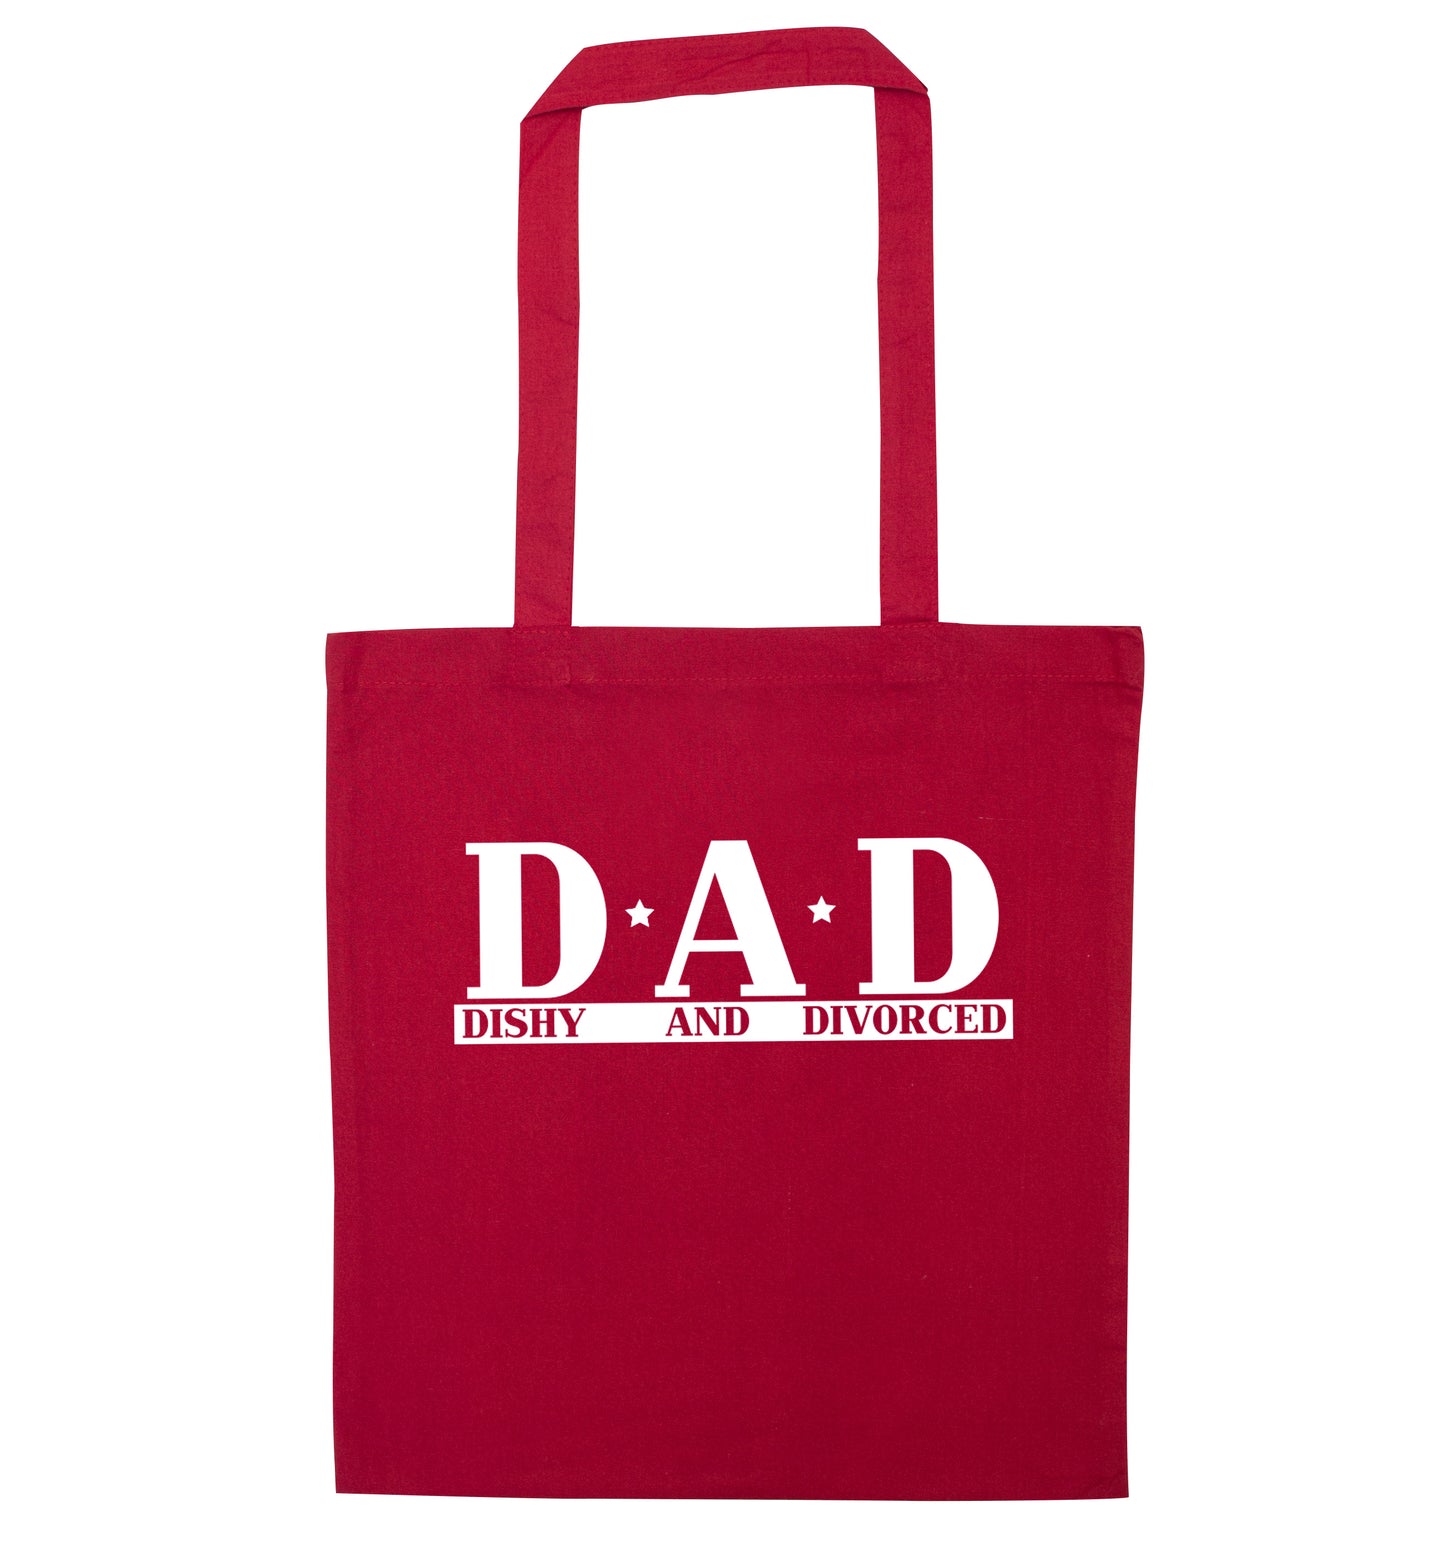 D.A.D meaning Dishy and Divorced red tote bag